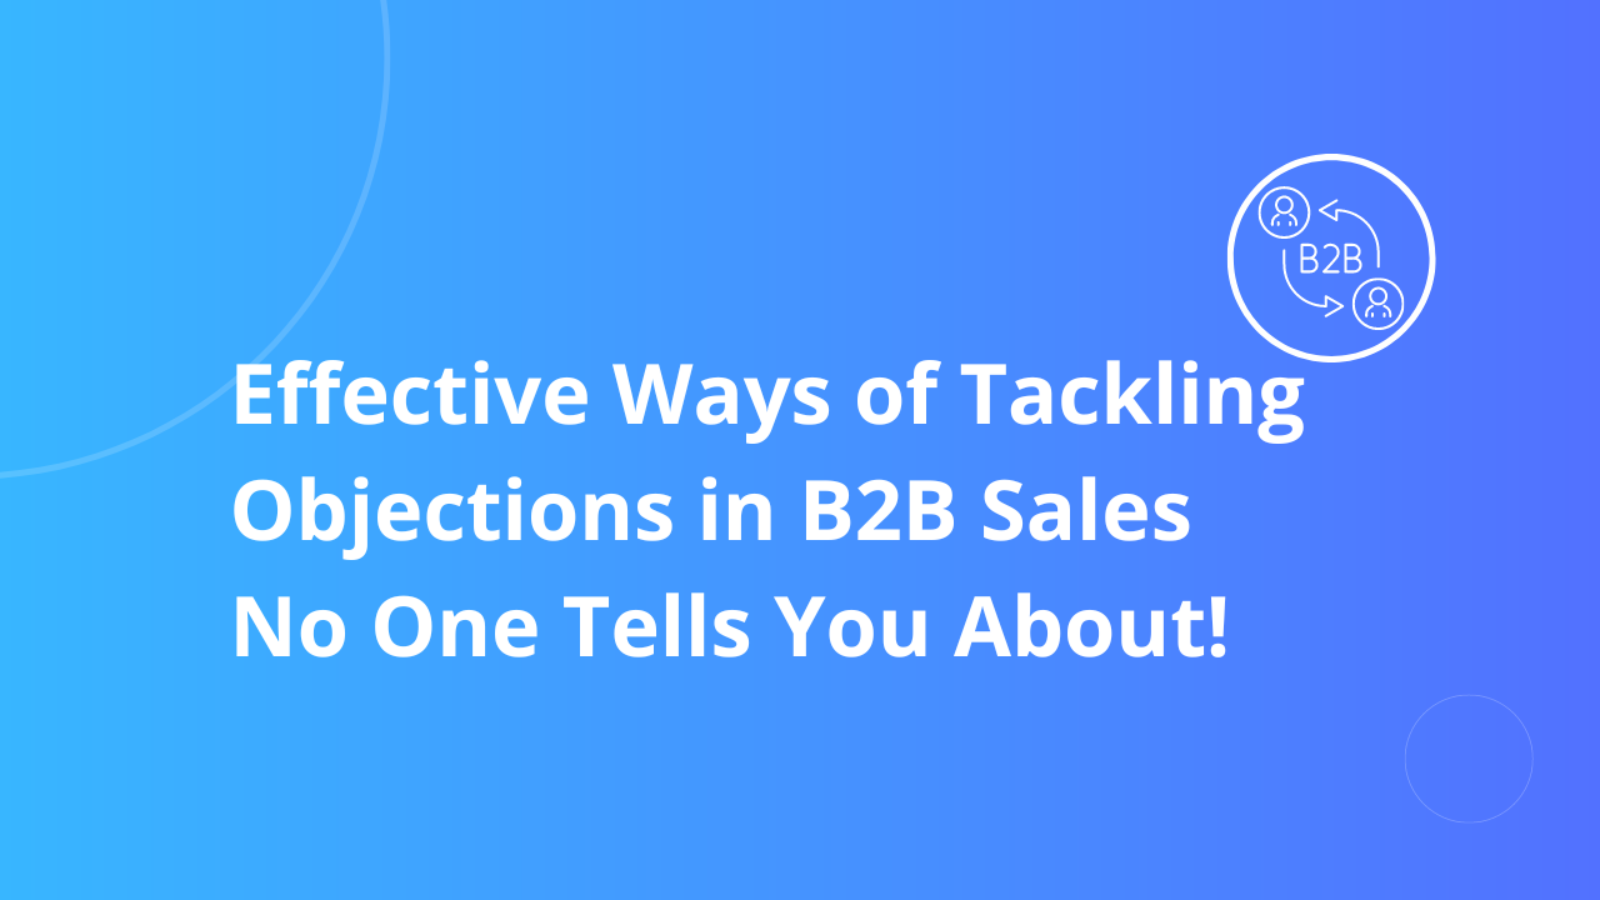 Effective Ways of Tackling Objections in B2B Sales No One Tells You About